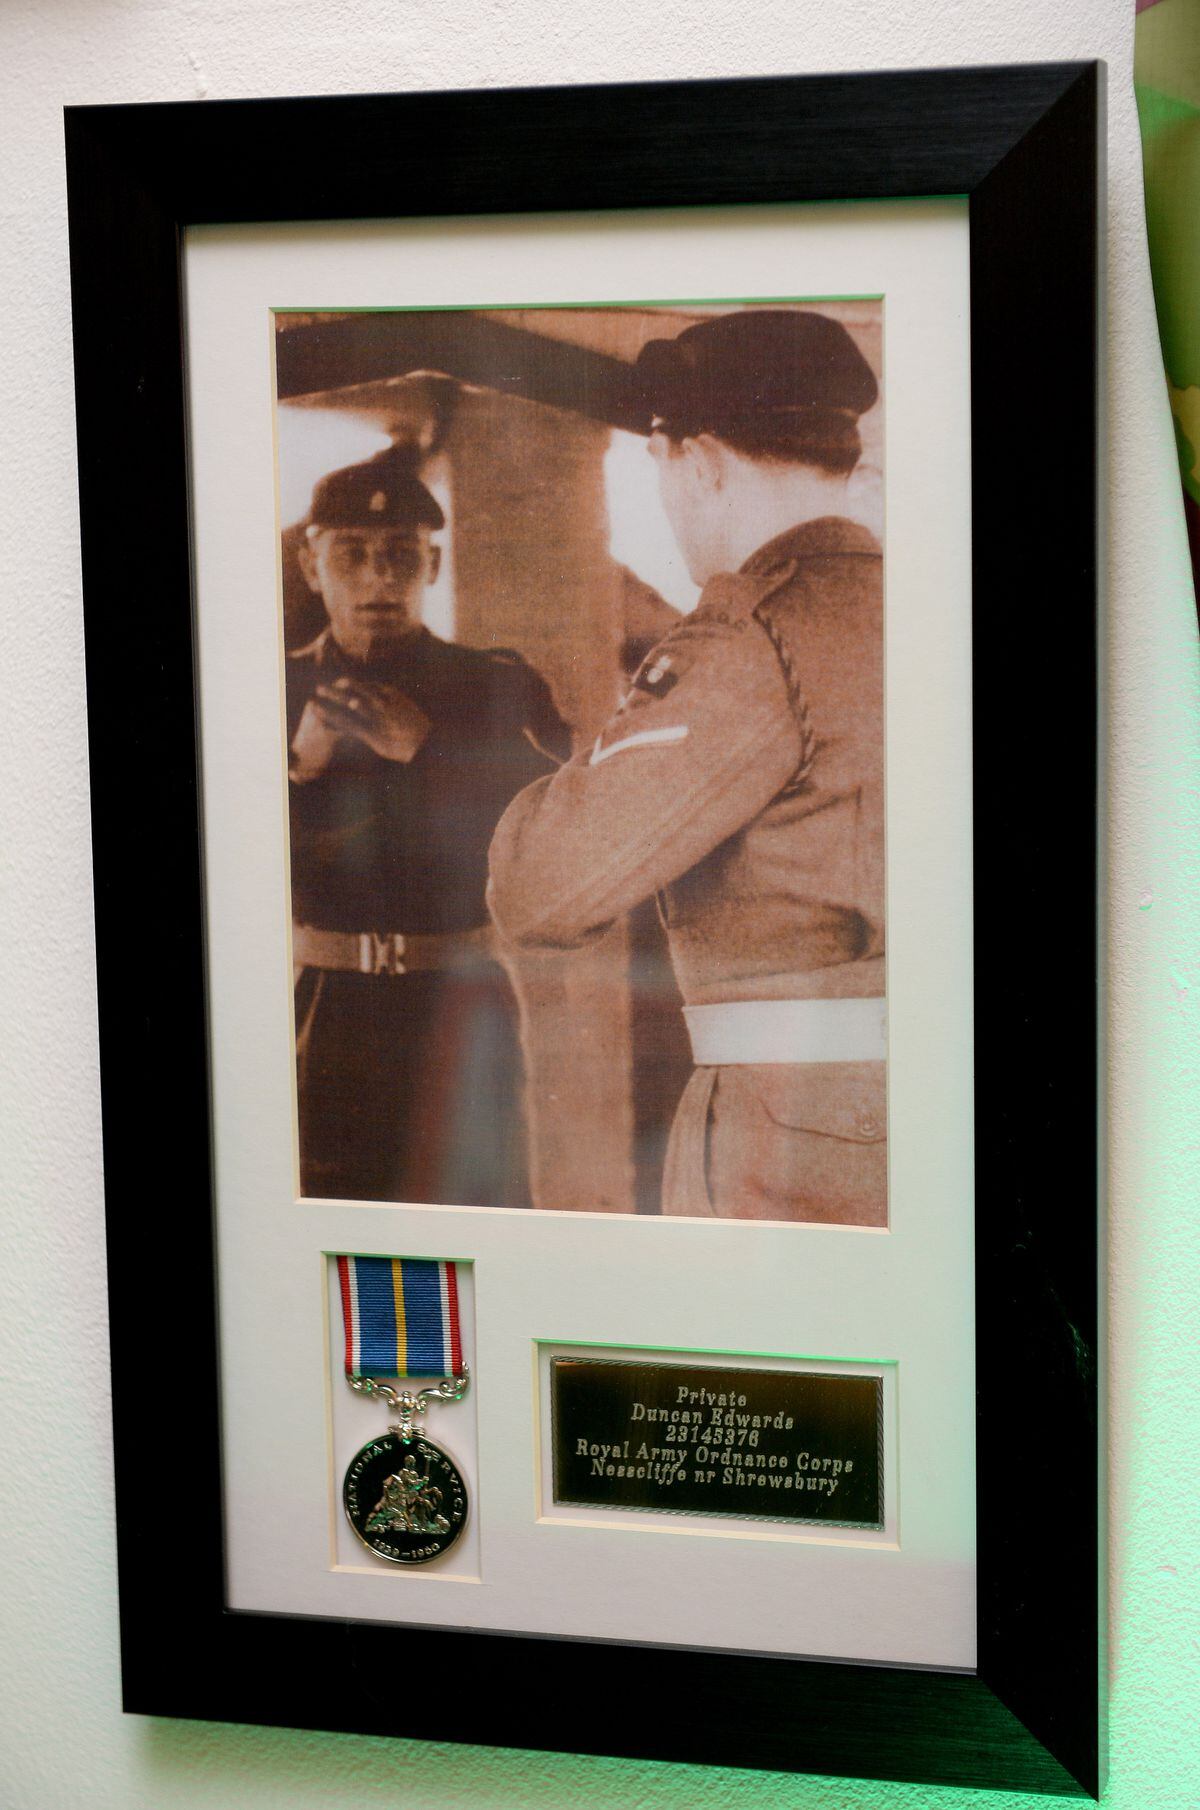 Duncan's National Service medal, that he never received before his death